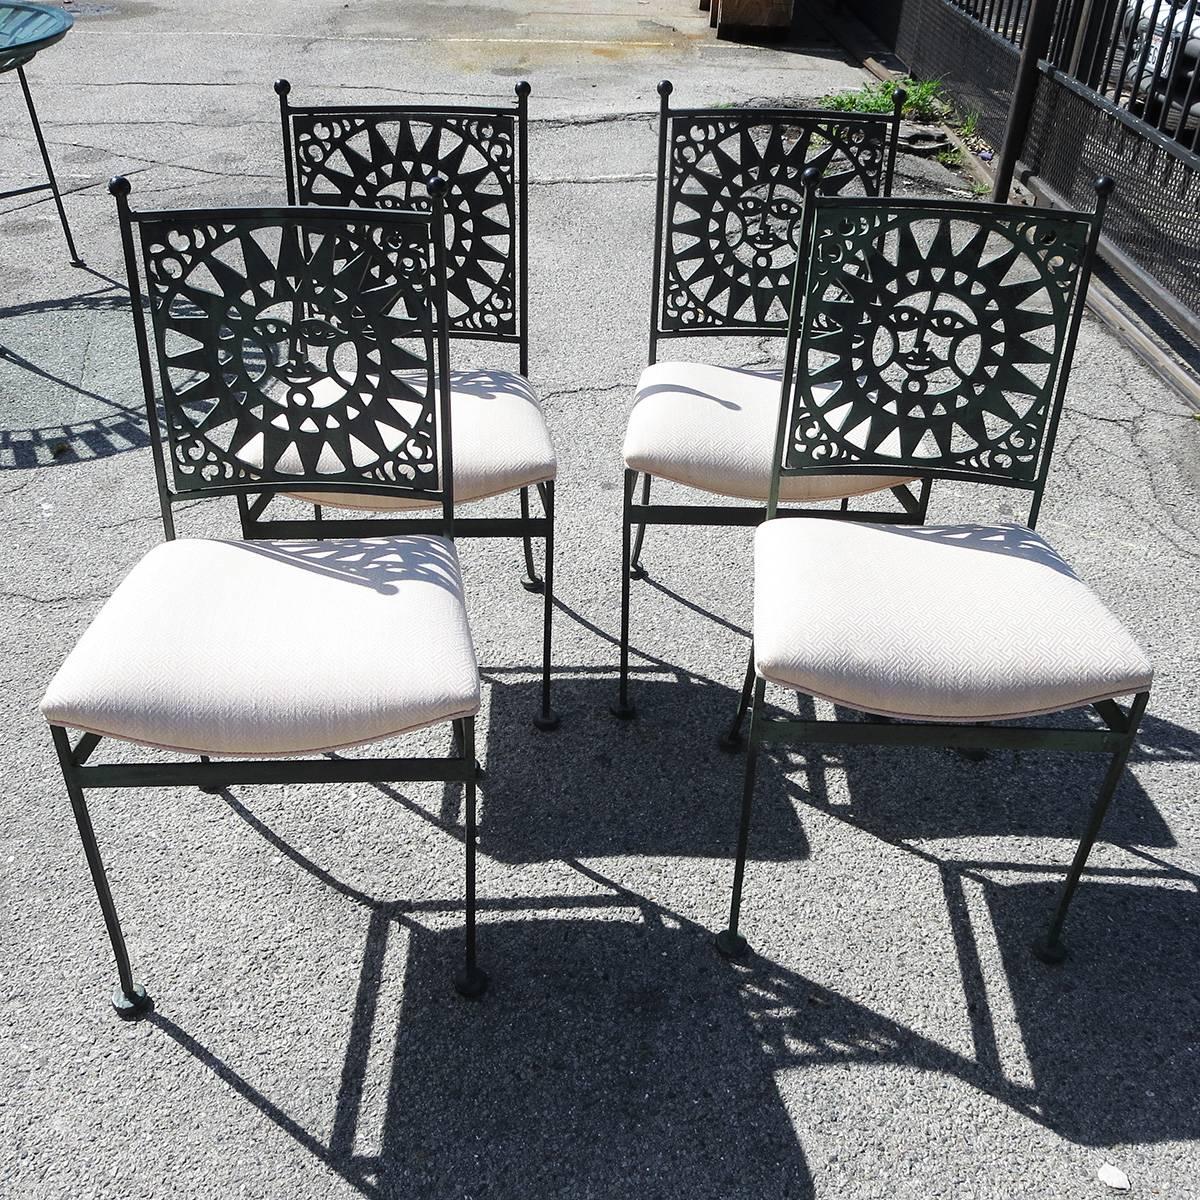 RETIREMENT SALE!!!  EVERYTHING MUST GO - CHECK OUT OUR OTHER ITEMS.

Created in the 1960s for the Shaver Howard Furniture company, these patinated dining chairs were from the 